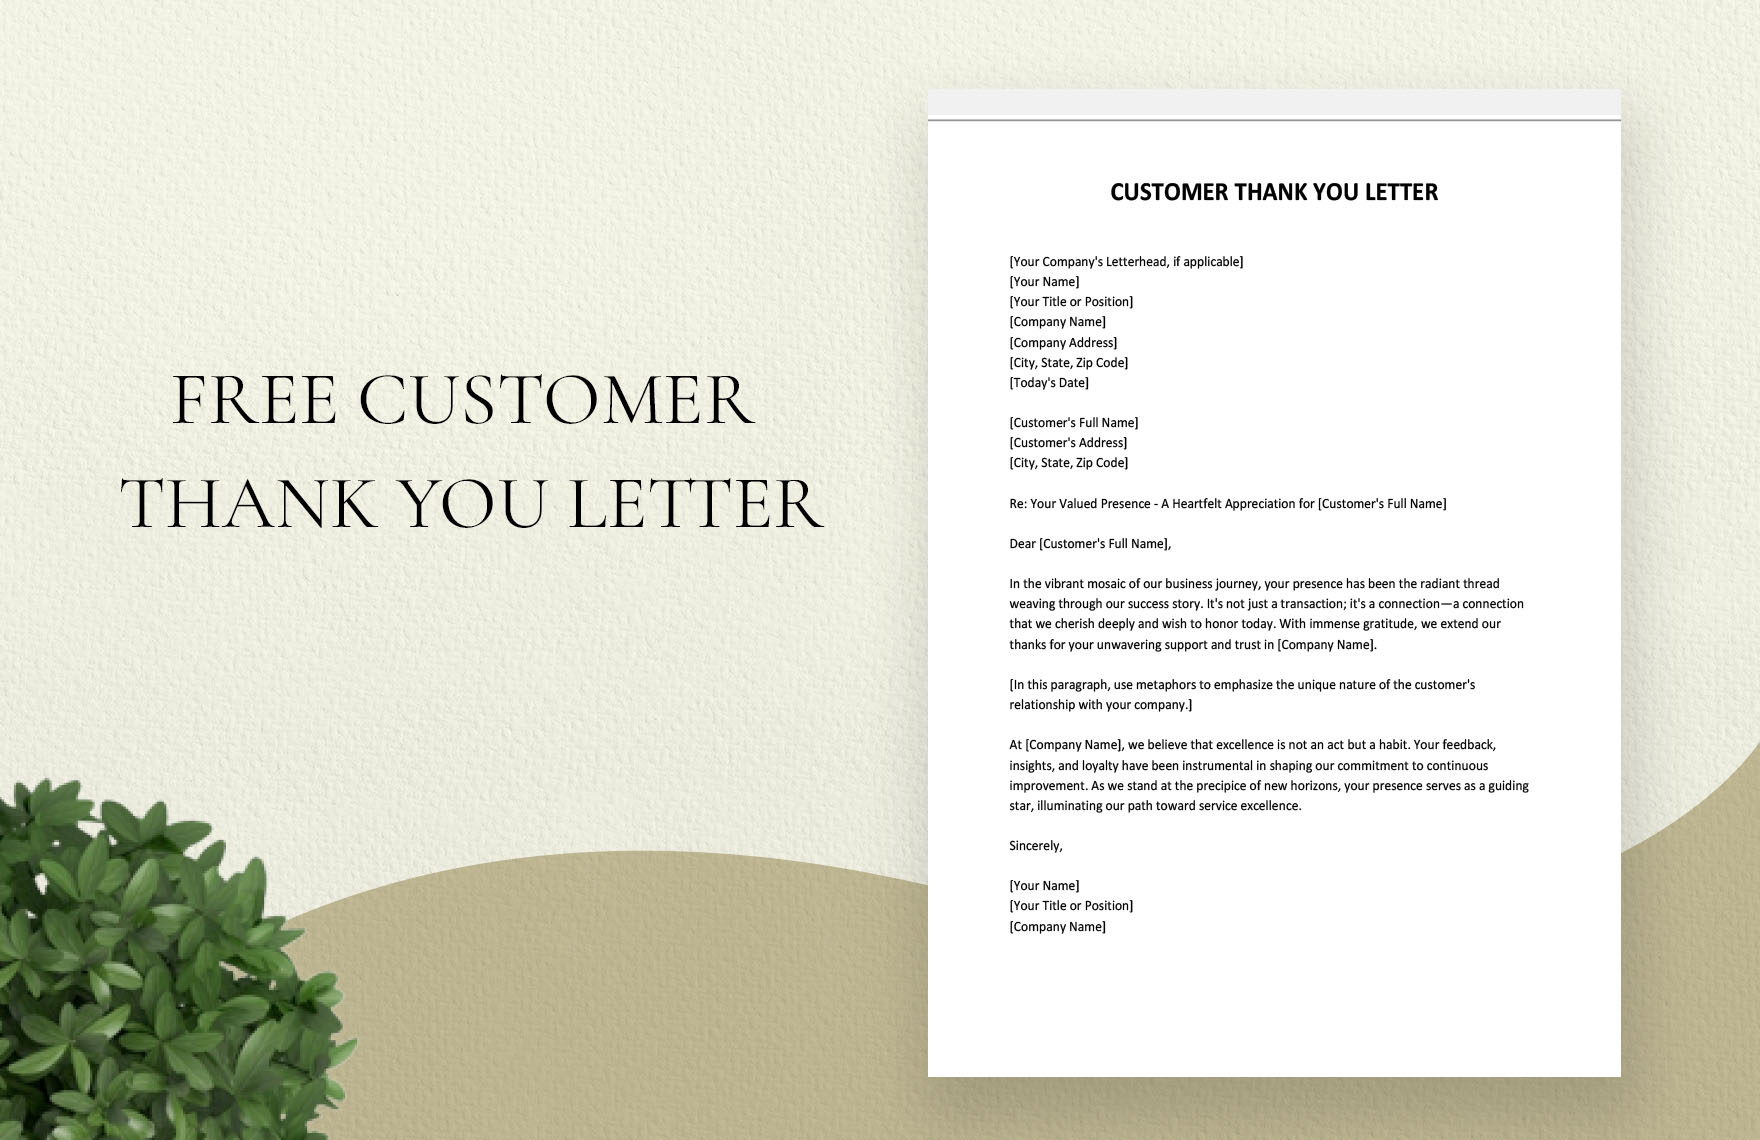 Free Customer Thank You Letter